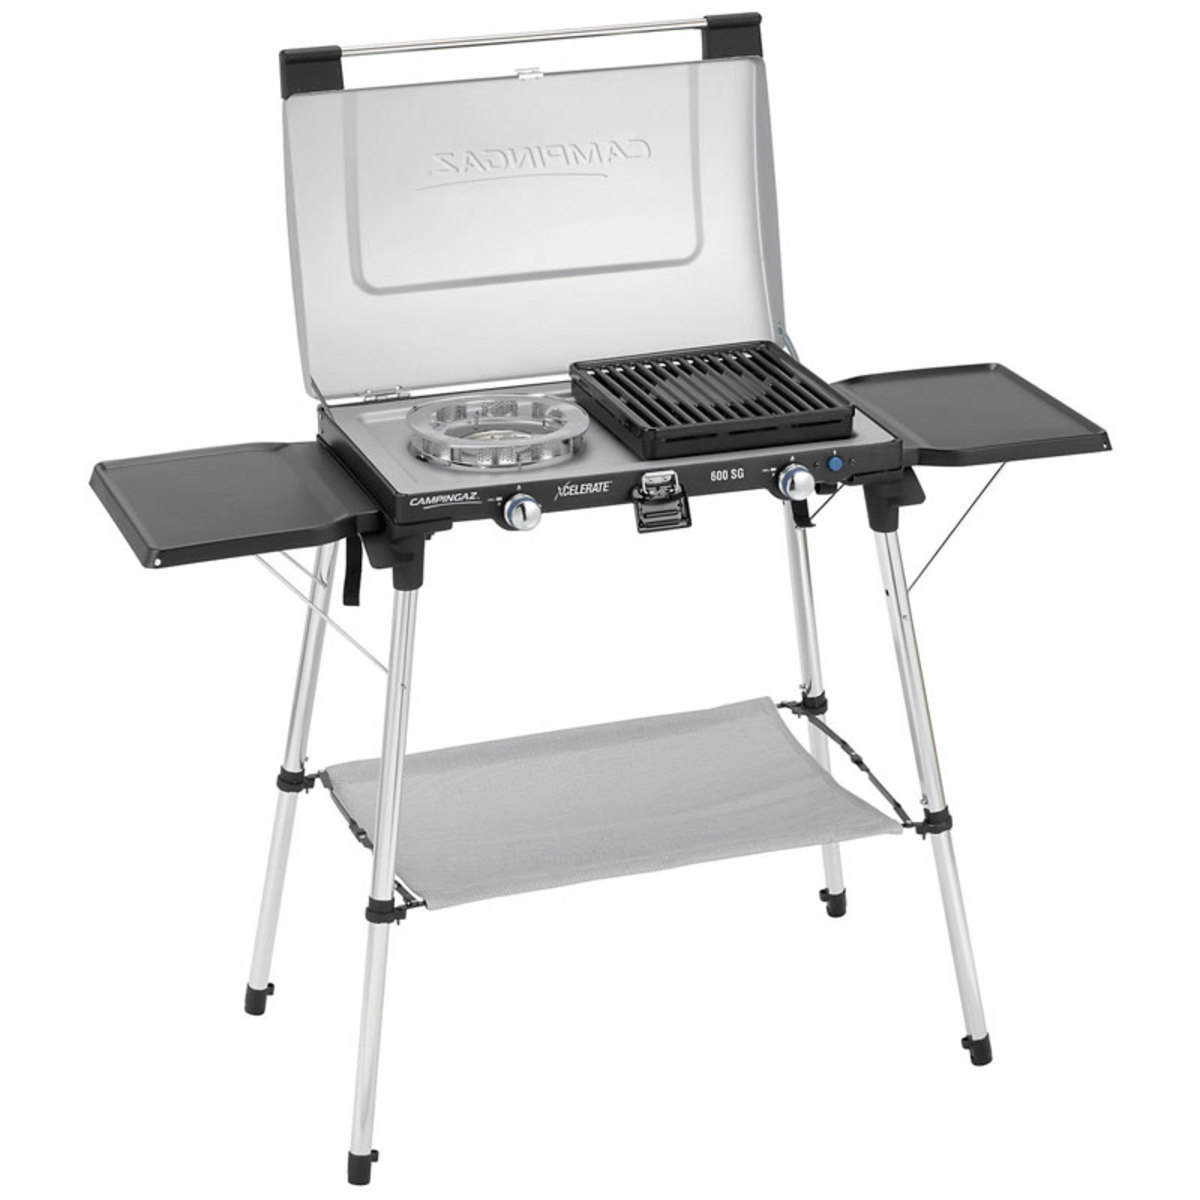 Campingaz 600SG Double Burner Stove With Stand